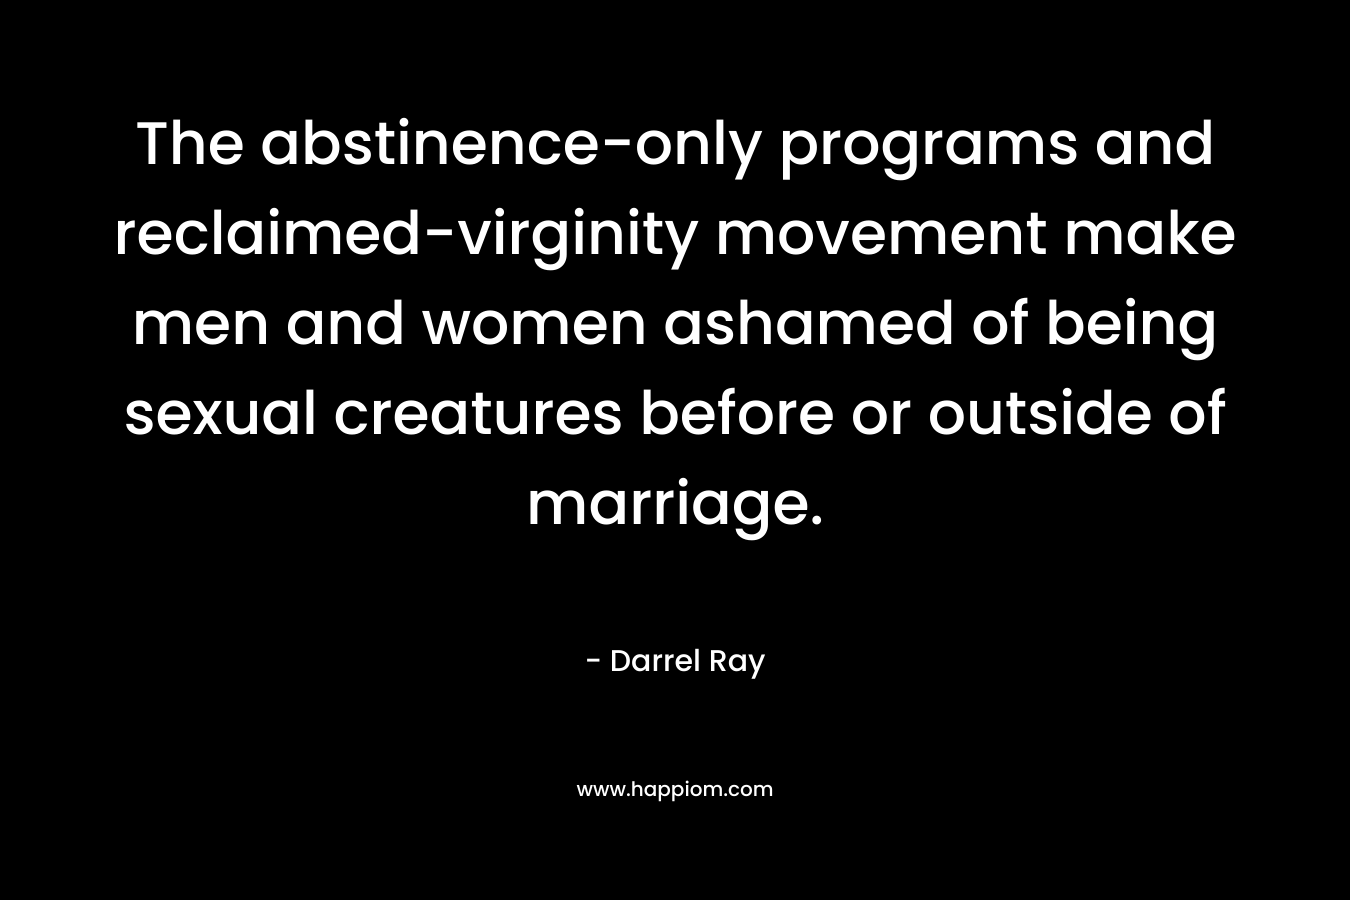 The abstinence-only programs and reclaimed-virginity movement make men and women ashamed of being sexual creatures before or outside of marriage. – Darrel Ray